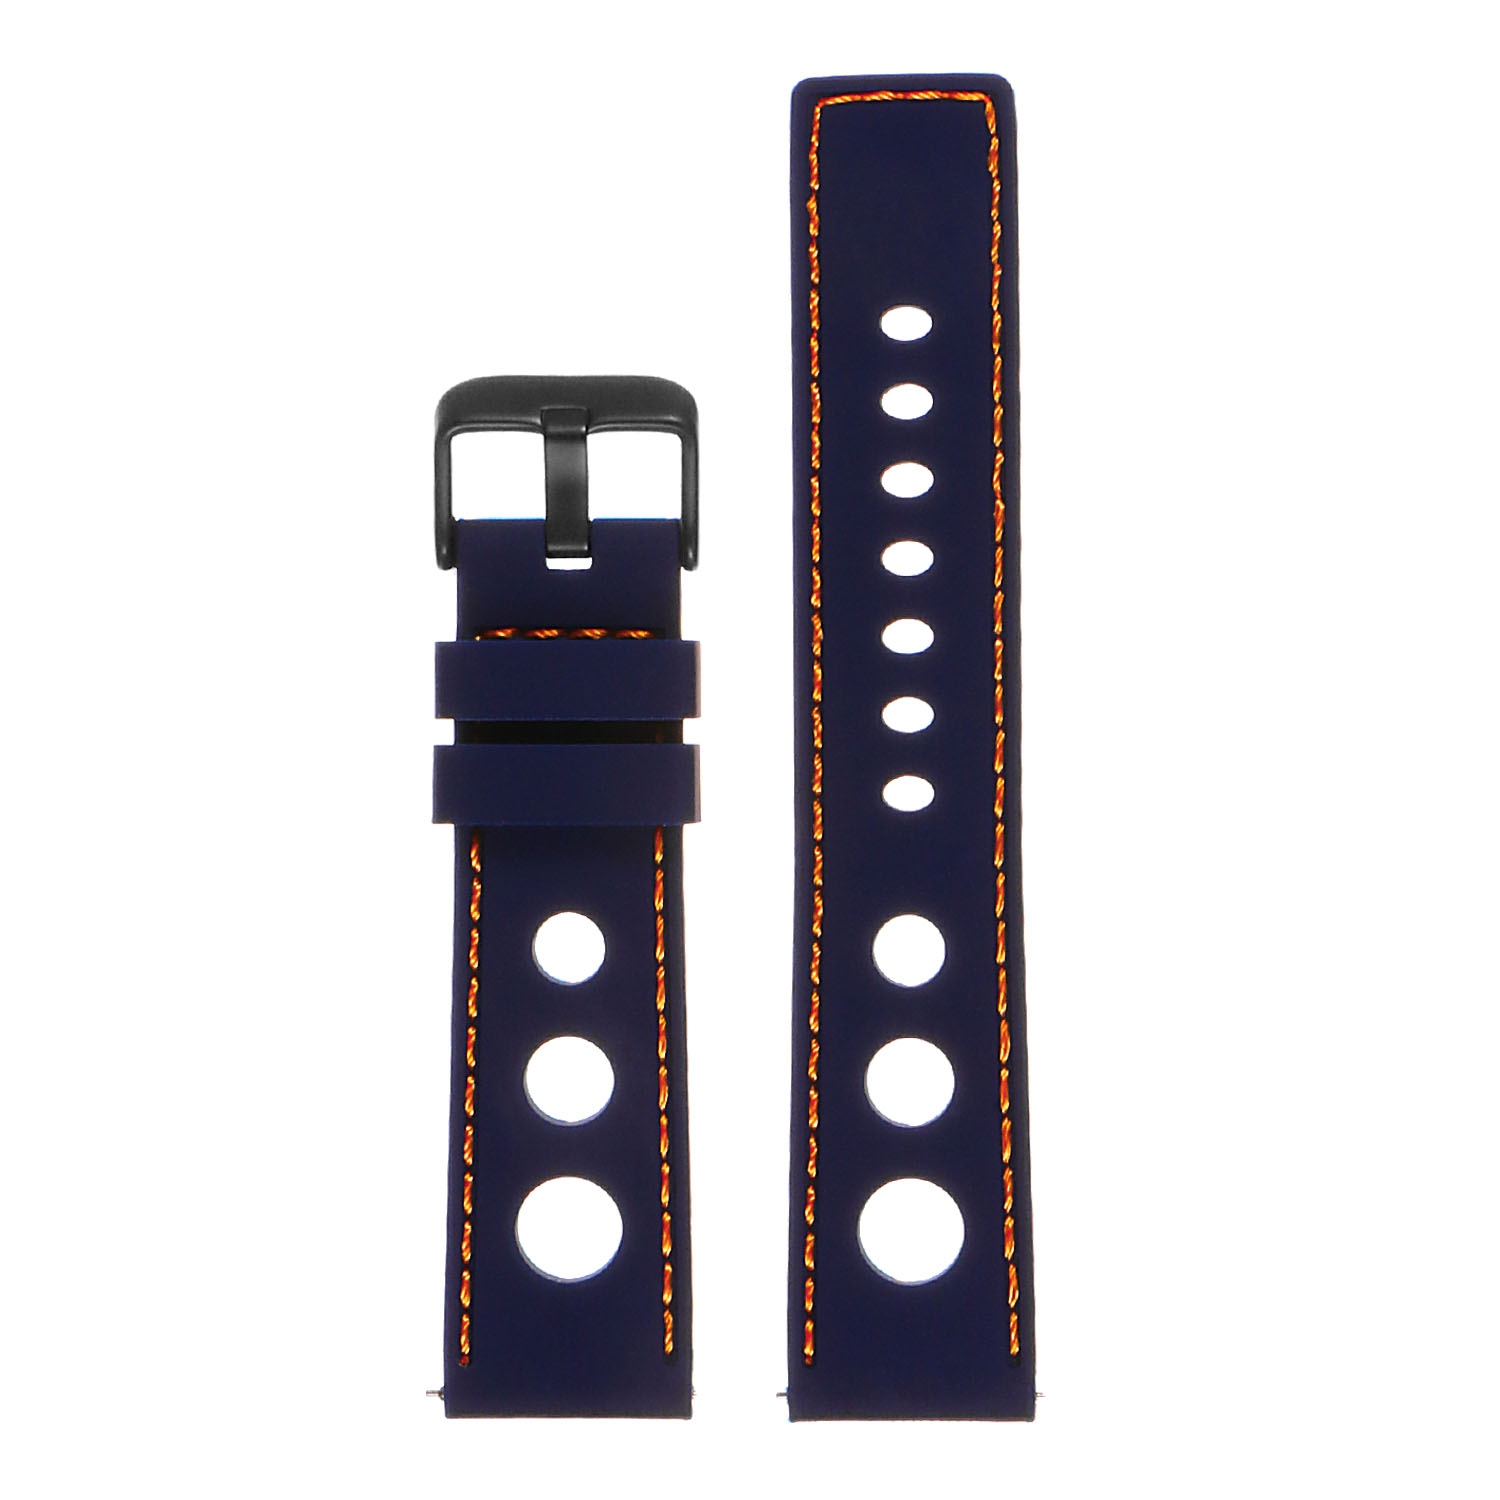 StrapsCo Silicone Rubber Rally Watch Band Strap for Samsung Galaxy Watch Active2 - Blue & Orange (Black Buckle)